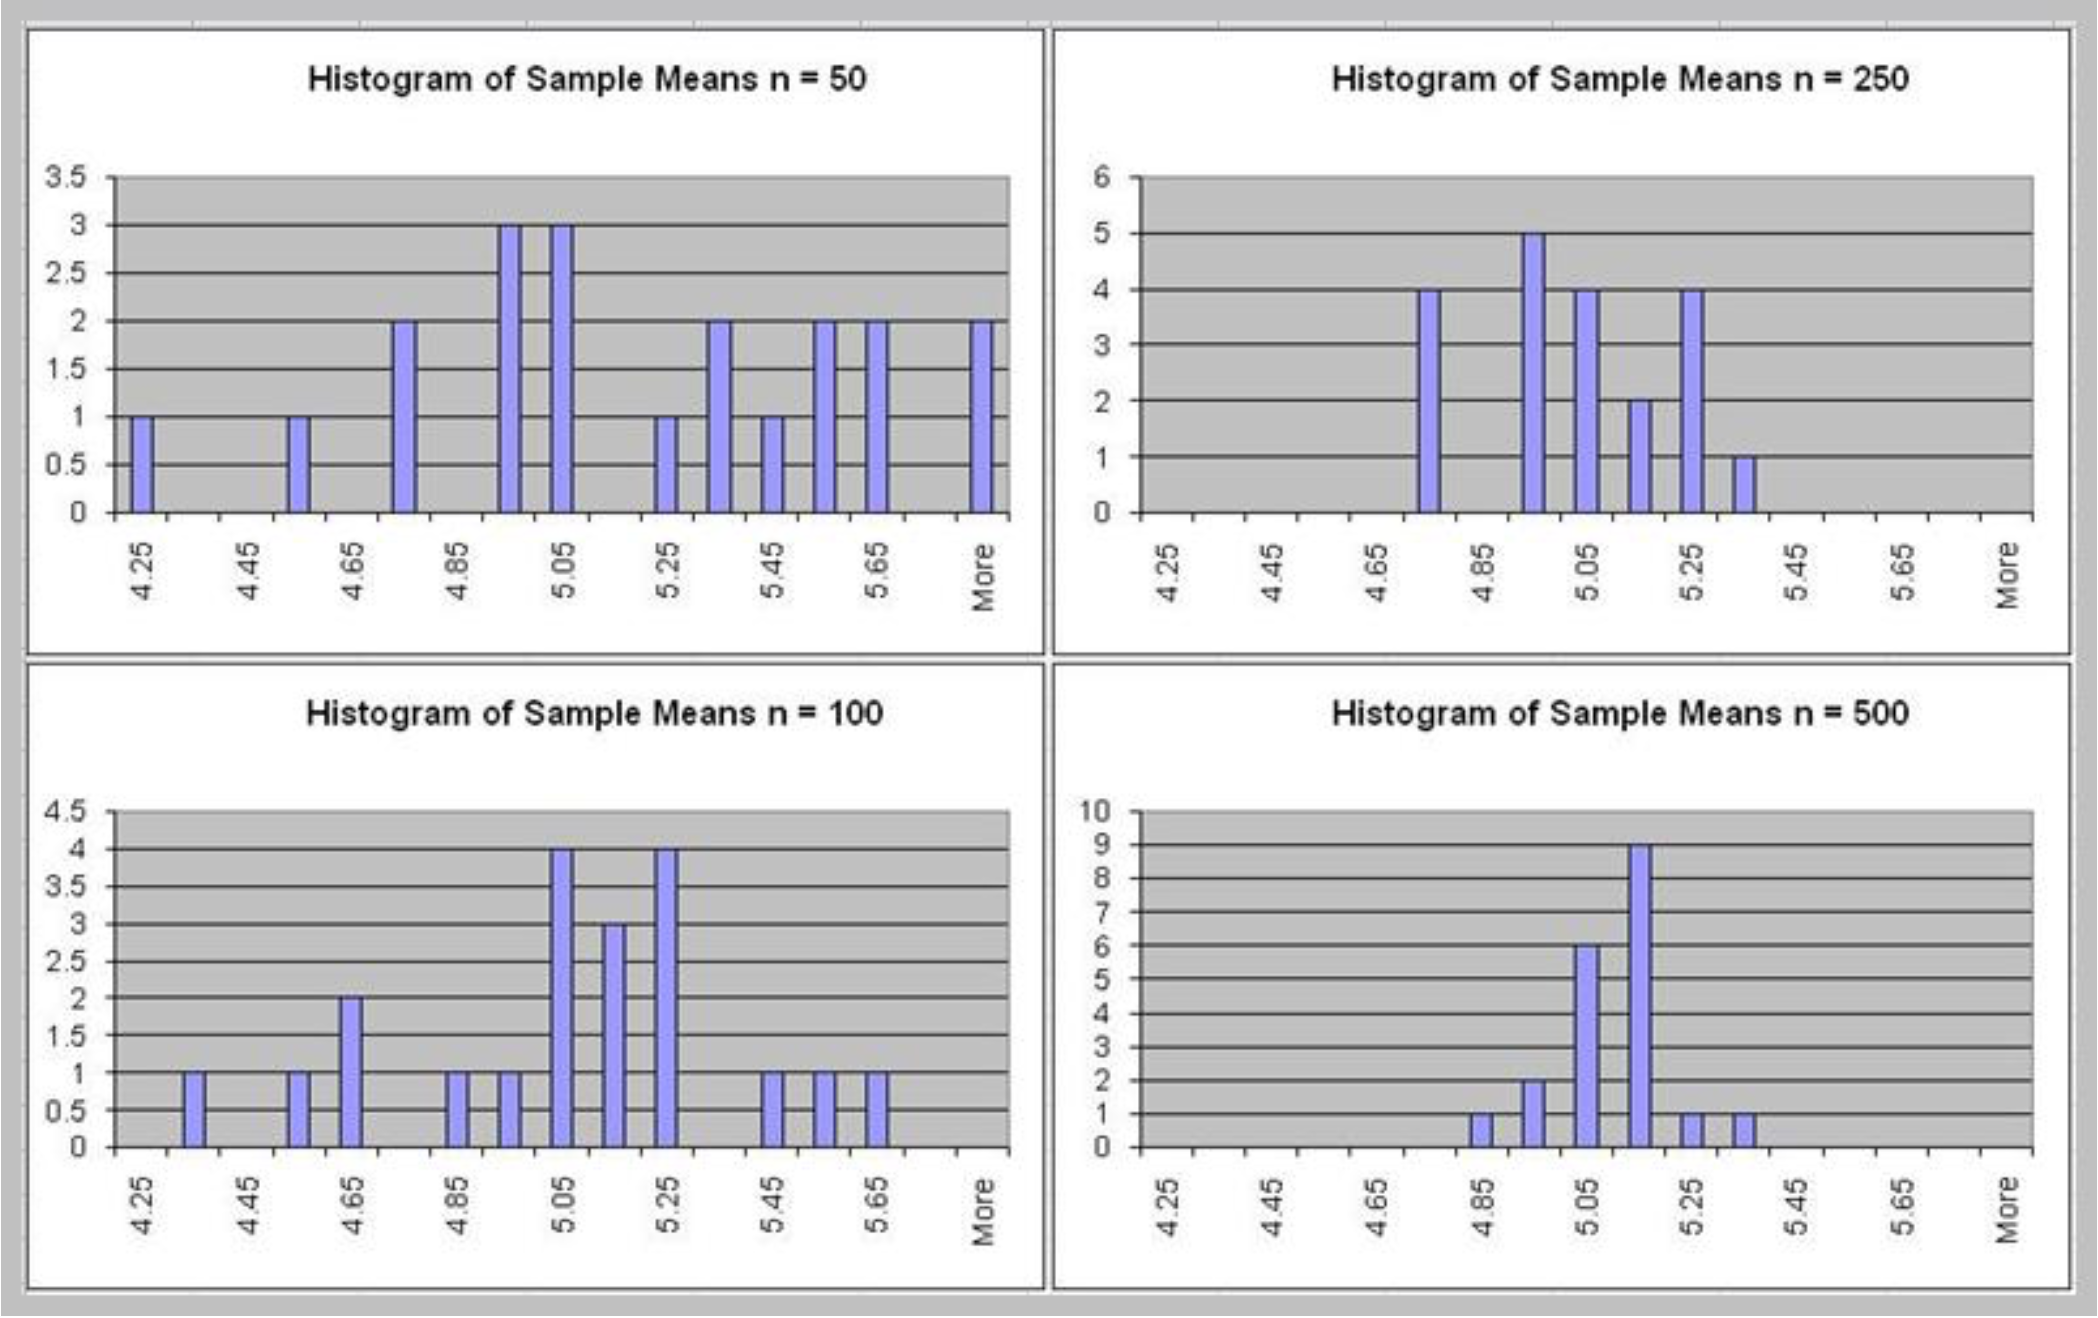 Results for Other Sample Sizes